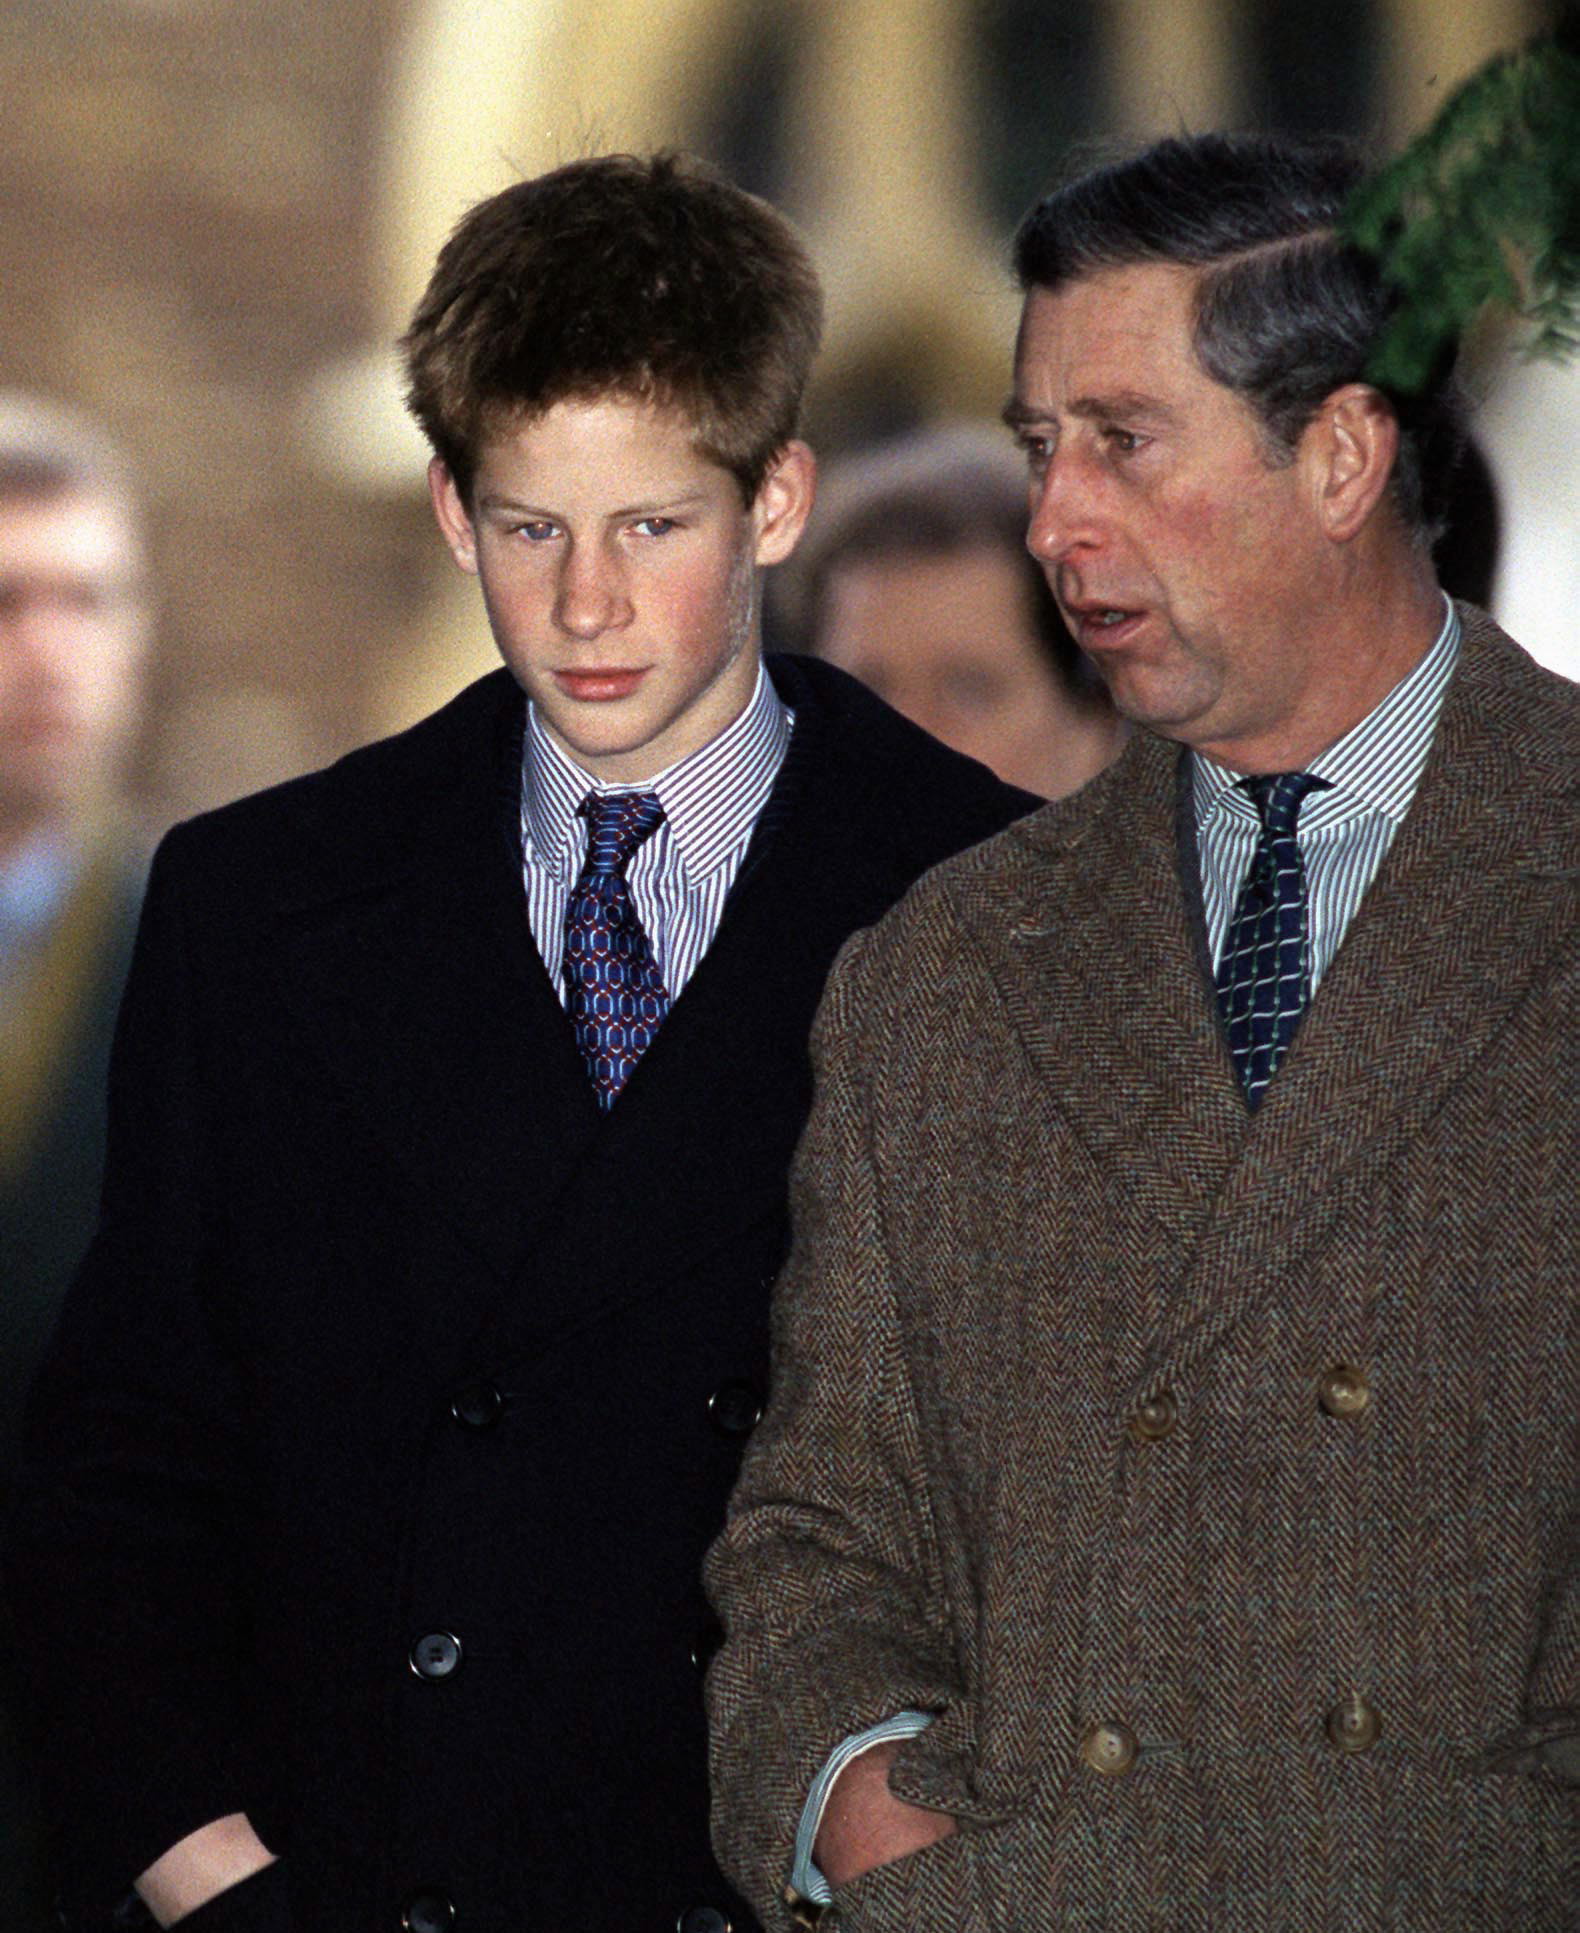 Prince Charles and Prince Harry attending a Christmas church service on December 25, 1999 | Source: Getty Images